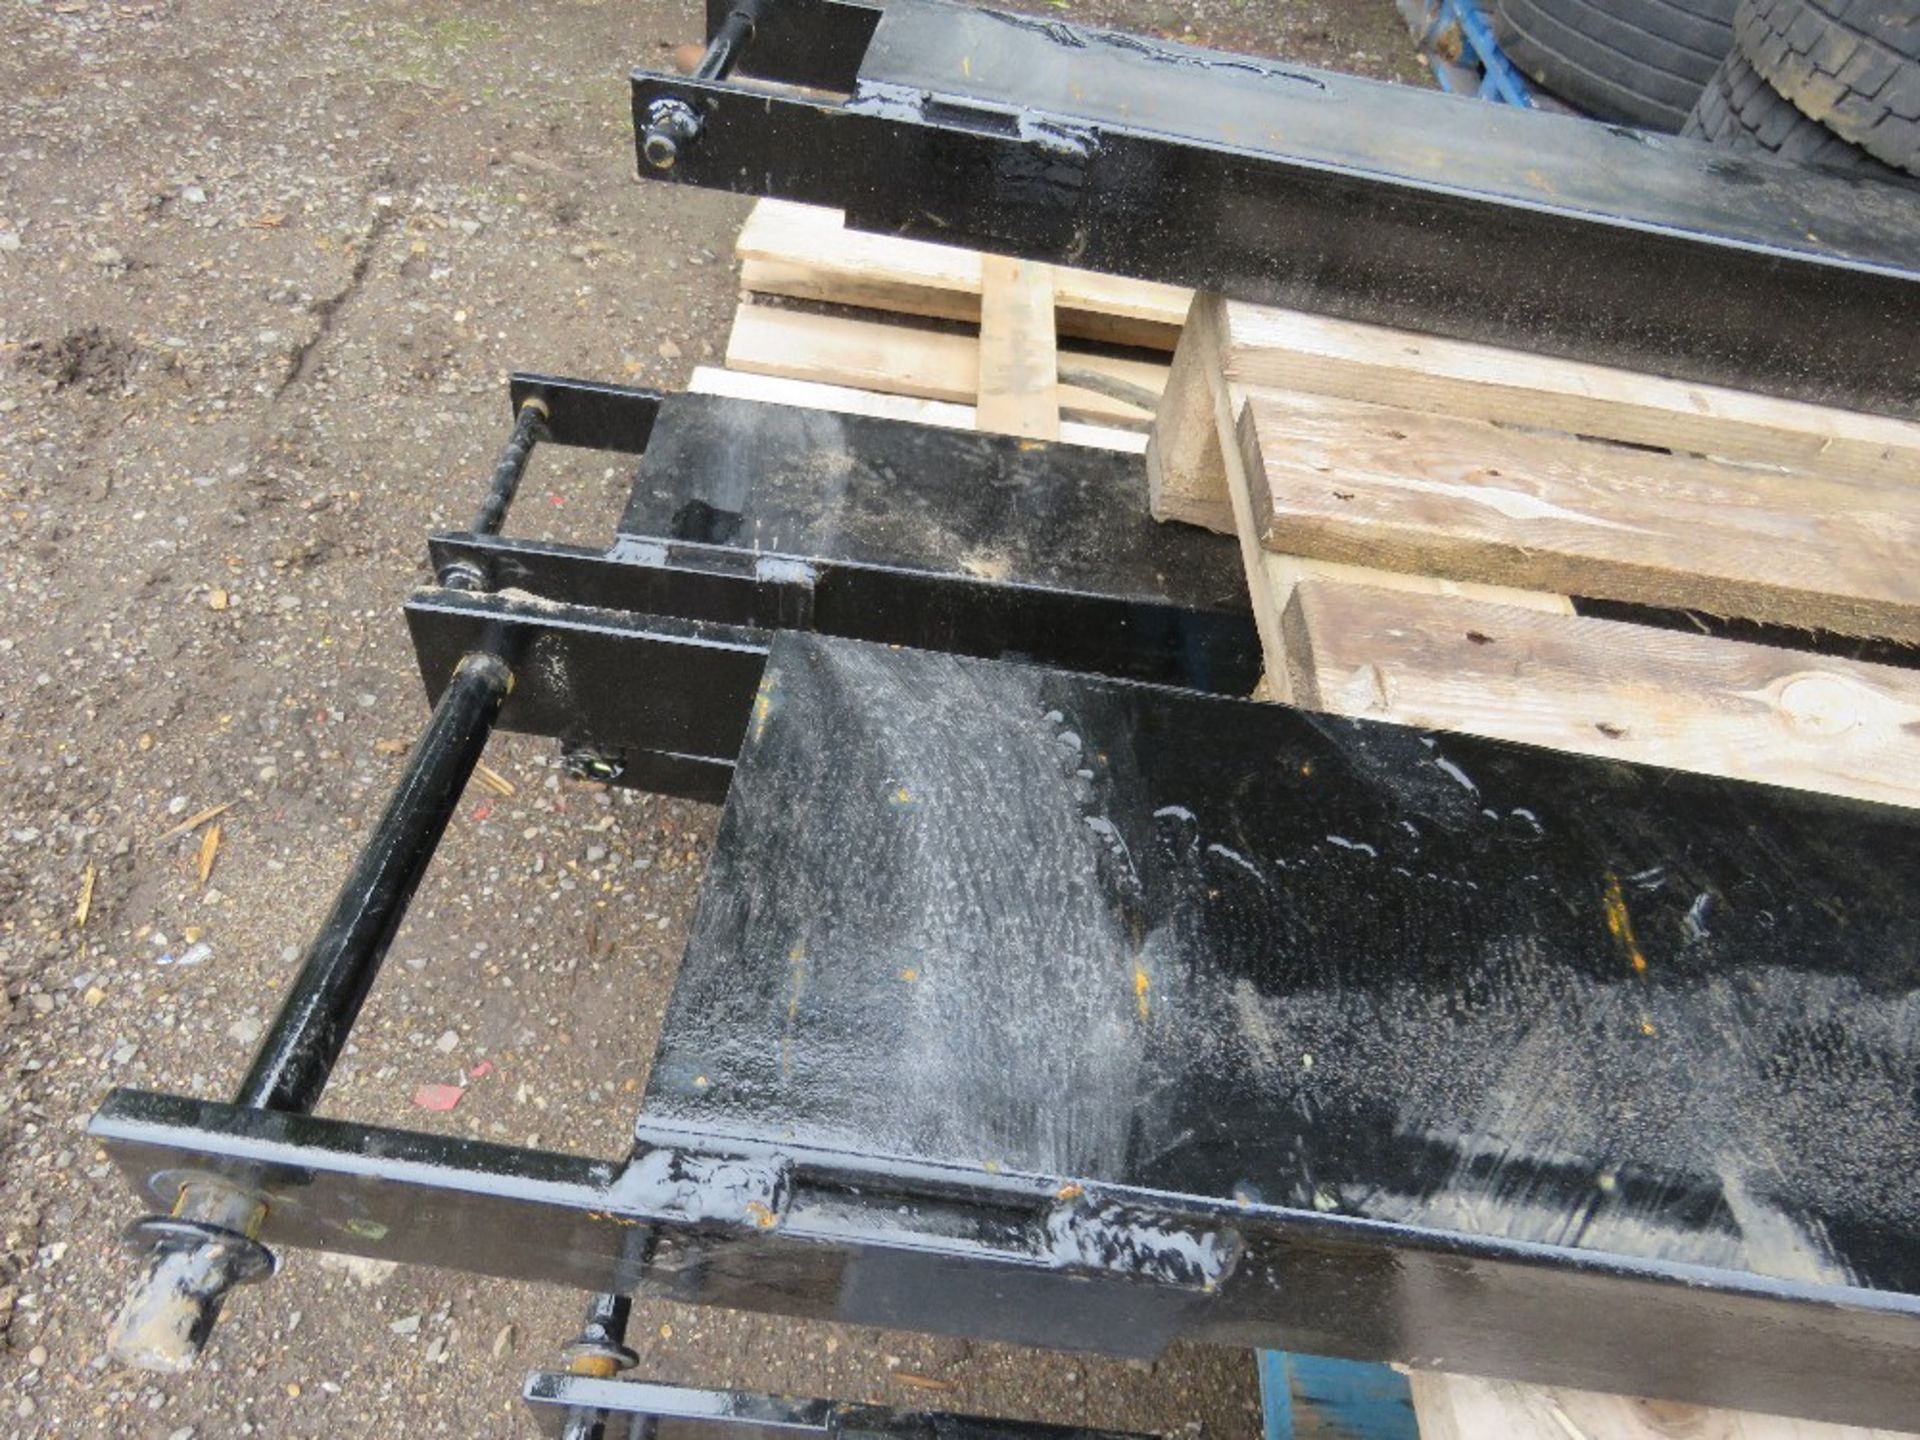 PAIR OF 6FT LENGTH FORKLIFT EXTENSION TINES/SLEEVES, 6" WIDTH, WITH LOCKING PINS. - Image 2 of 2